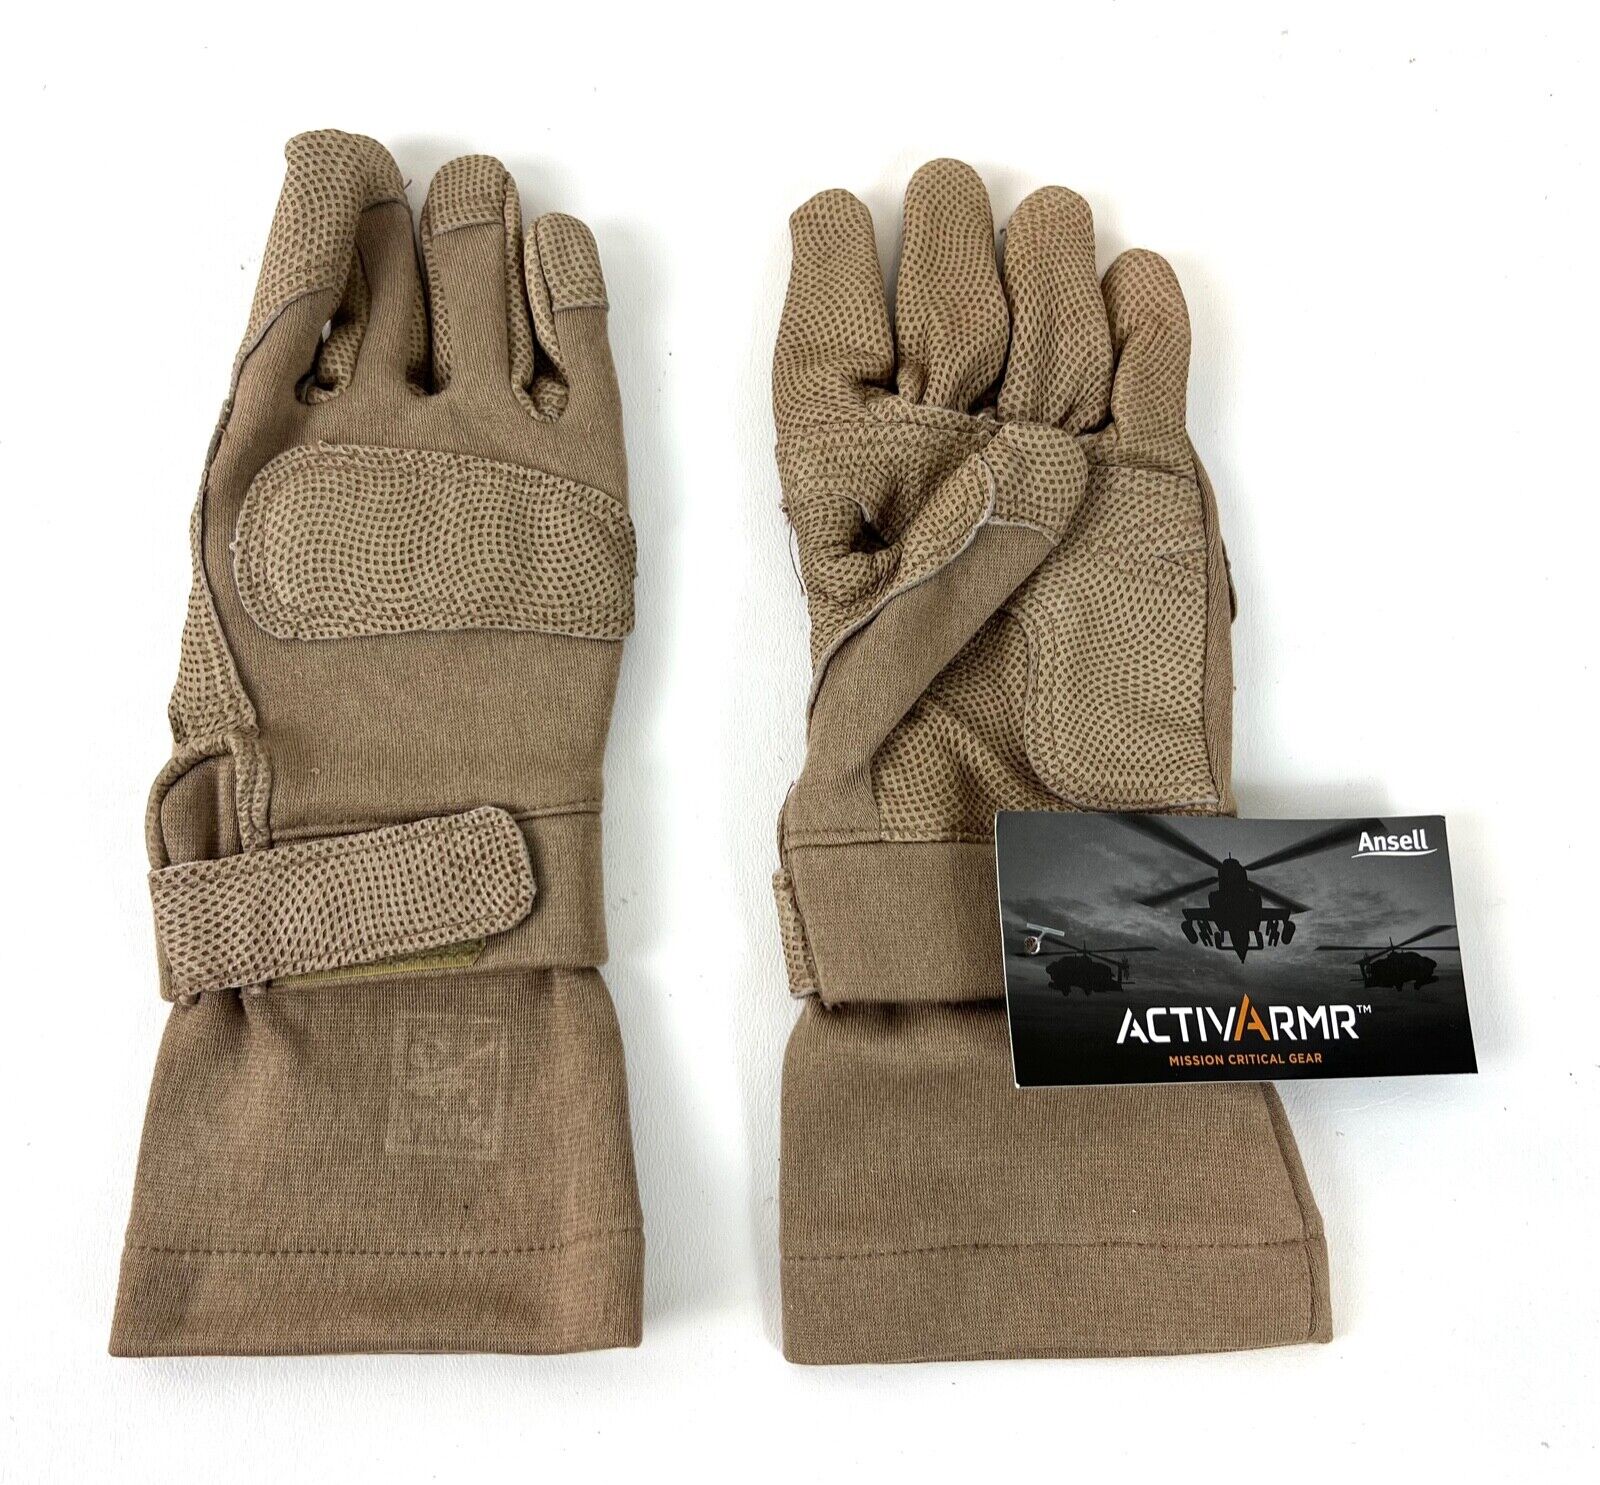 New USMC FROG Ansell ActivArmr 46-409 Combat GEC Gloves Coyote Tan Size Small